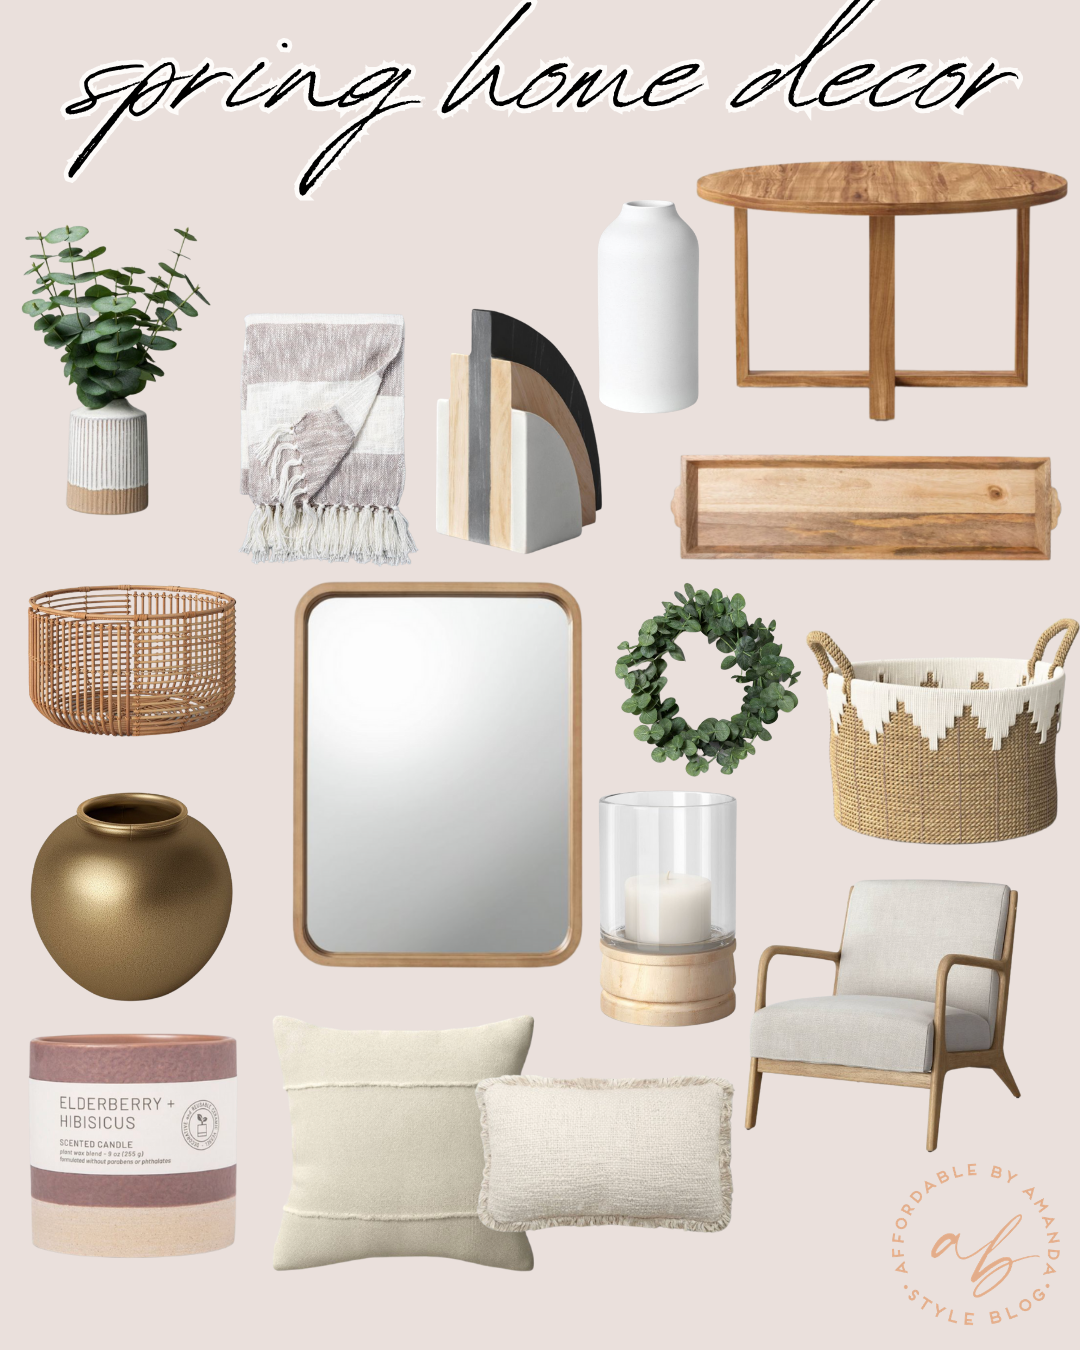 Target Home Decor Ideas: Spring 2021 - Affordable by Amanda